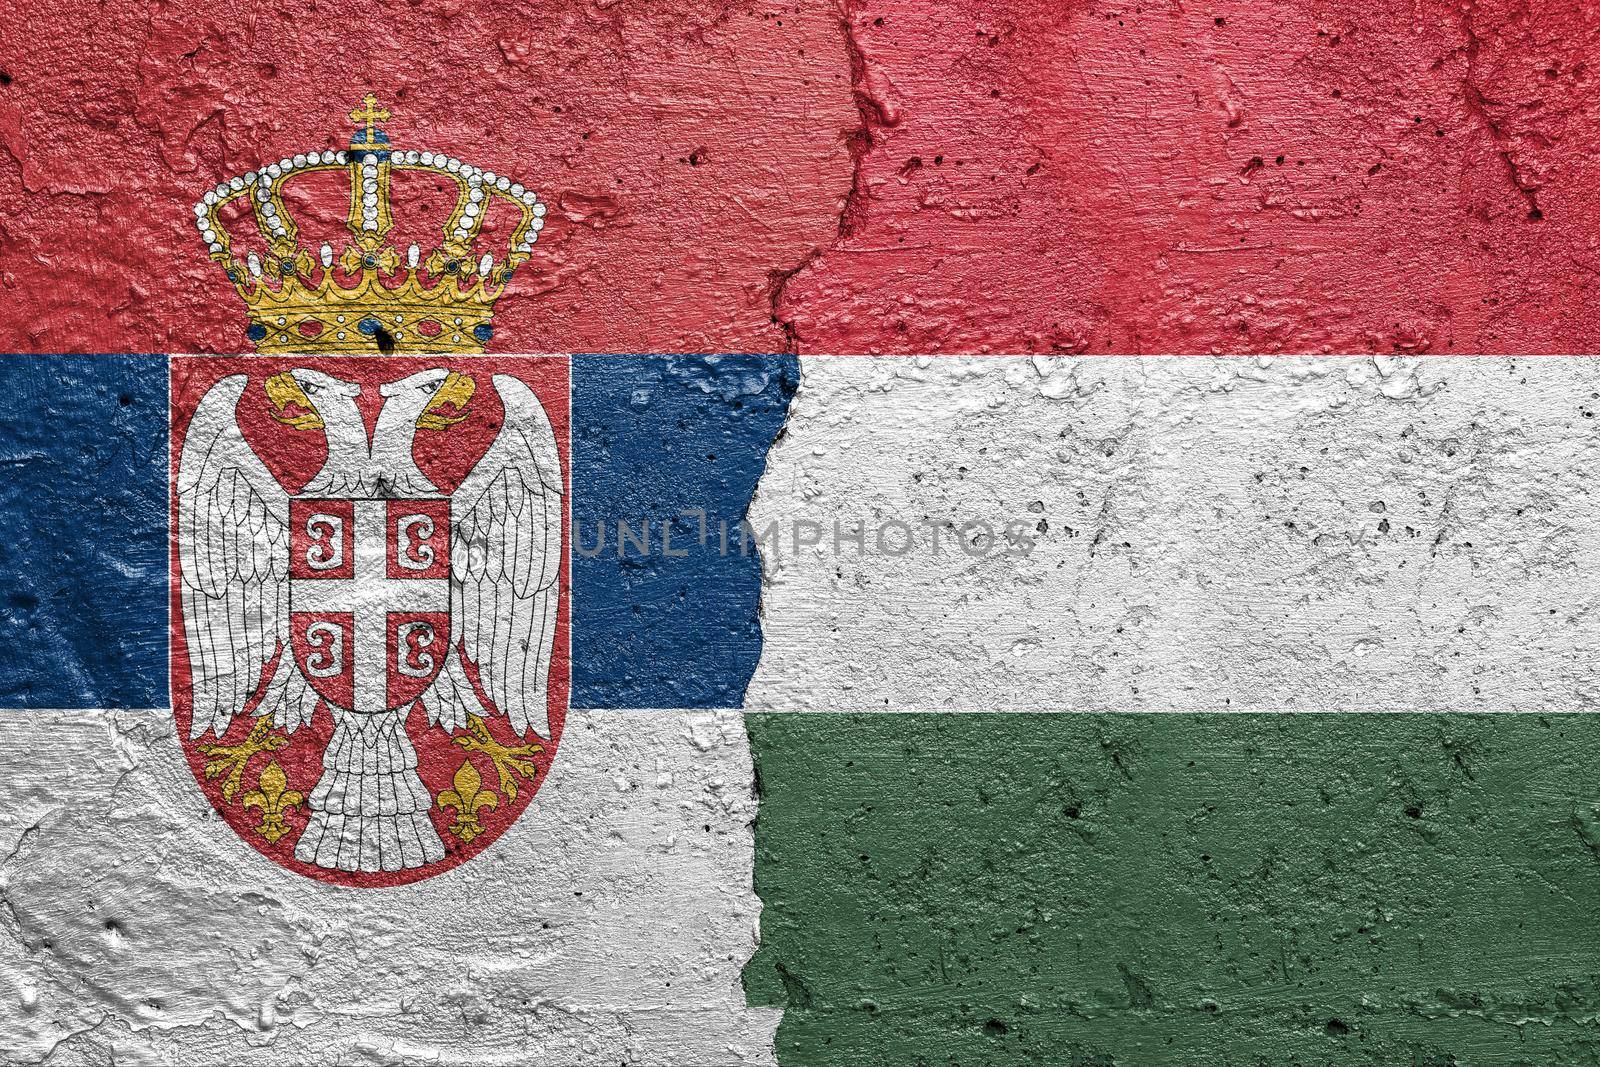 Serbia and Hungary flags  - Cracked concrete wall painted with a Serbian flag on the left and a Hungarian flag on the right